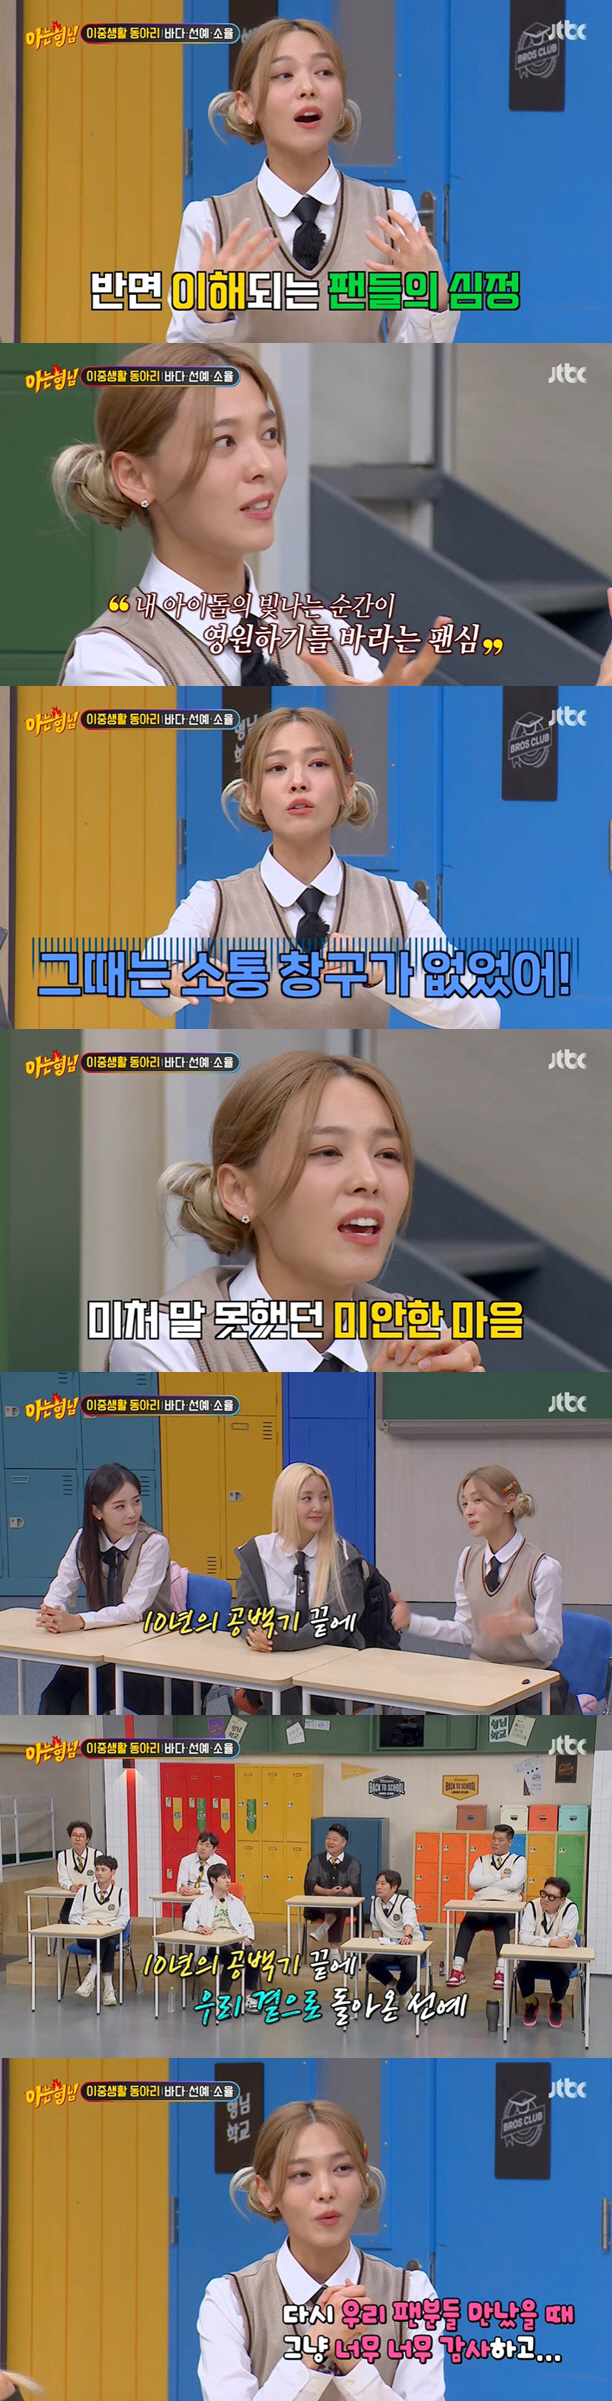 Knowing Bros Sunye, Sea and So Yul recalled the time of the marriage.In JTBC Knowing Bros broadcast on the 18th, it was packed as a special group girl group.The first generation girl group S.E.S Sea, the second generation girl group Sunye from Wonder Girls, and the third generation girl group Crayon Pop So Yul appeared and talked about anecdotes and irreverent child care at that time.Sea, Sunye and So Yul introduced themselves, saying, After the girl group activities, I became a childs mother. I am living a colorful double life.Sea, who represents the first generation Idol, said at the time of his debut, S.E.S was a concept that a wealthy daughter sang as a hobby.So I took a Baro van from my debut. Sea also recalled the time when he came back with a song Embrace after a long time in Japan, and said, I did a guerrilla concert after practicing live very hard.It was the time when Finckle and Baby Vox were active, so I thought I would have forgotten Cage, but when I checked the number of spectators gathered, I could not manage my face. Sunye, a second-generation representative from Wonder Girls, recalled the days of Tell me, which painted the whole nation with a retro frenzy, and said, At that time, SNS was not active, so I could not feel the popularity. .Sunye said, I was too busy working to feel the reaction. At that time, I was able to realize the popularity of the newspaper. However, at a university festival, the sound of the shout was so loud that I could not hear the MR sound.Thats when I first realized my popularity, he said.The third-generation Idol Crayon Pop So Yul, which has become very popular with its unique concepts, attracted attention by mentioning Helmet, the trademark of Papapa.So Yul said, I thought it would be pure and cute concepts like other girl groups, but I was embarrassed to have to wear Helmet on stage. It was hard to think that I had been living in Idol Producer for 6 years.All five members had a hard time because it was their first performance. So I put on hypnosis, put on goggles and danced. I managed to overcome the pressure by controlling my mind. But when I tried it on, it looked cute. So it was okay.I have received a lot of love outside of my thoughts, he said frankly.In addition, Sea, Sunye, and So Yul poured out a lot of child-rearing talk that had been piled up and made everyone shout. So Yul said, Hee-yul! I know very well that my mother, Father, was Idol.Im going to be more popular than my mothers father, he says. Im 7 years old and Im on the air, and I know that Im already an entertainer and a celebrity. When I get a photo request from the street, I pose and give fan service.Im enjoying it very much, he said.Sea said, I gave my daughter Lua a Sea Table hairstyle that reminds me of S.E.S., but I felt strange.In particular, Sunye said, I did not want to be separated from my child for a second from the moment I gave birth, so I chose to give birth to a family. Sunye said, I got married to Canada and got a honeymoon baby.Marriage and Baro became a mother. Canada does not have a postpartum care center, but the Archer Daniels Midland wipe system is too good.As long as the mother is healthy, she can safely give birth at home with Archer Daniels Midland wipes. After giving birth, I watched Baros child.Its a special and precious experience for me, he said.On this day, Sunye recalled the marriage and expressed his sorryness to the fans.Sunye, who previously made her debut as leader of the group Wonder Girls in 2007, left Wonder Girls in 2015 after a marriage in 2013.Sunye said, I was married when I was 24 years old. Of course there are entertainers lives and choices, but I understand the fans feelings.I do not have a fan who wants my Idols shining moment to last forever, he said. But when I married, there was no communication window. Im sorry for the fans. I was so grateful when I came back after a 10-year hiatus and met my fans again. I would like to have good energy in each others lives in the future.So Yul also said at the time of the marriage, So Yul said, I decided to marry someone I love, but I was worried about my fans, but my husband has too many fans.I had doubts that the marriage should be right now, he said. In conclusion, send me morning sickness candy and cheer me up because I grow old together. 